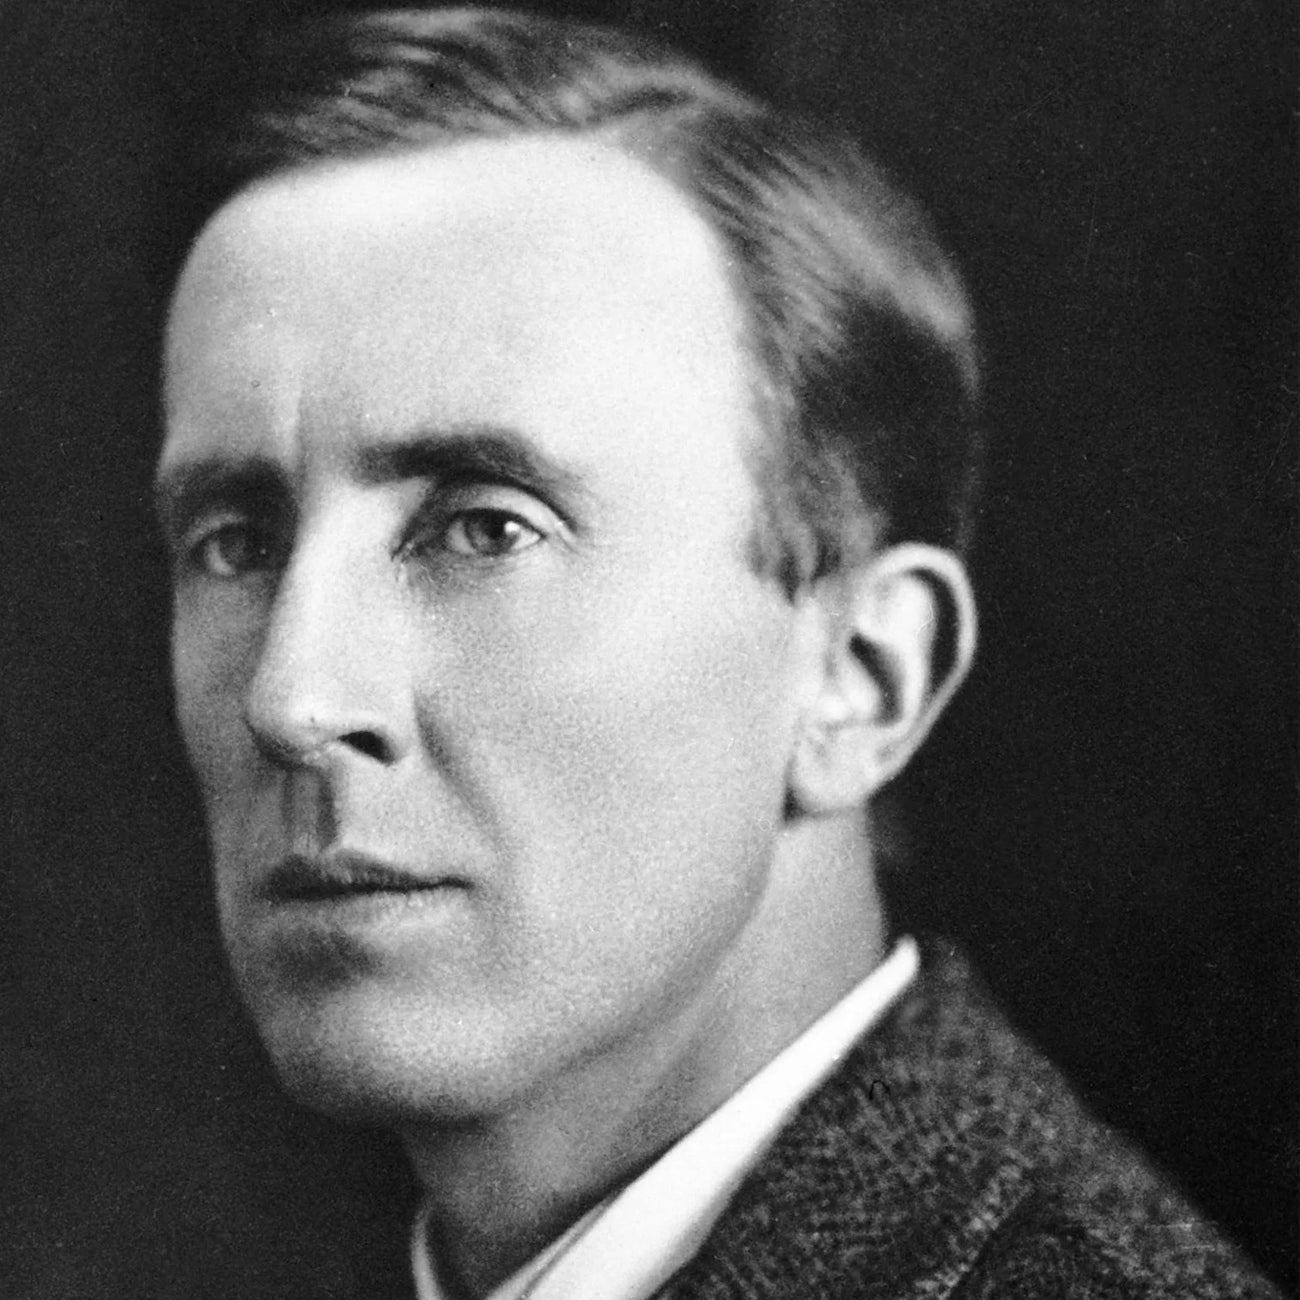 Photograph of J.R.R. Tolkien